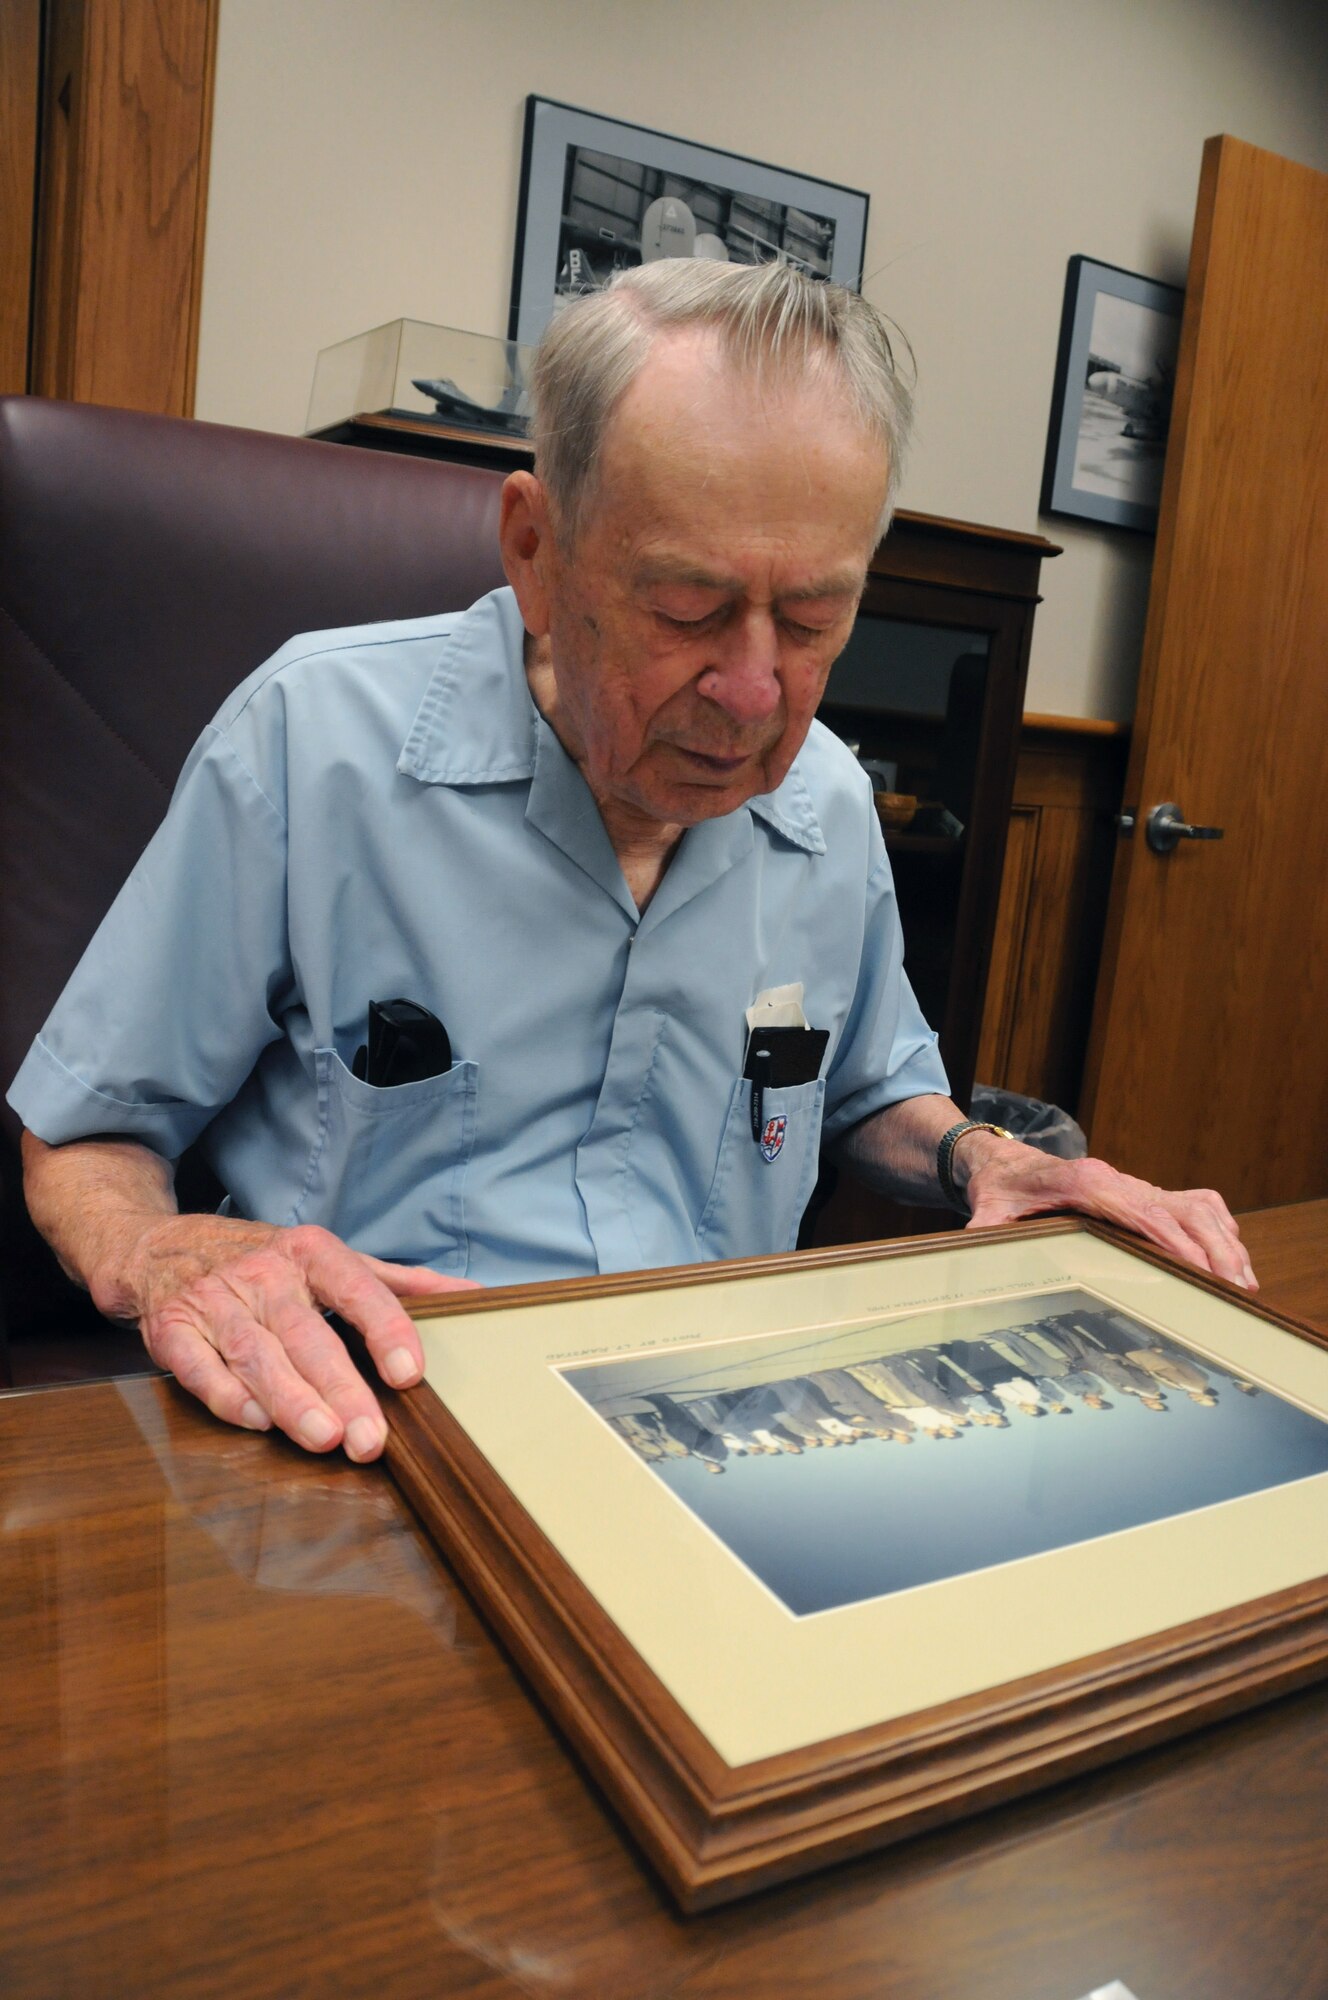 Captain Howard Ramstad (Ret.) reflects on a photograph taken by him of the original members of the 148th Fighter Wing. Capt. Ramstad, a founding member of the 148th Fighter Wing, was a pilot who flew the P-51 Mustang among other aircraft throughout his career.  